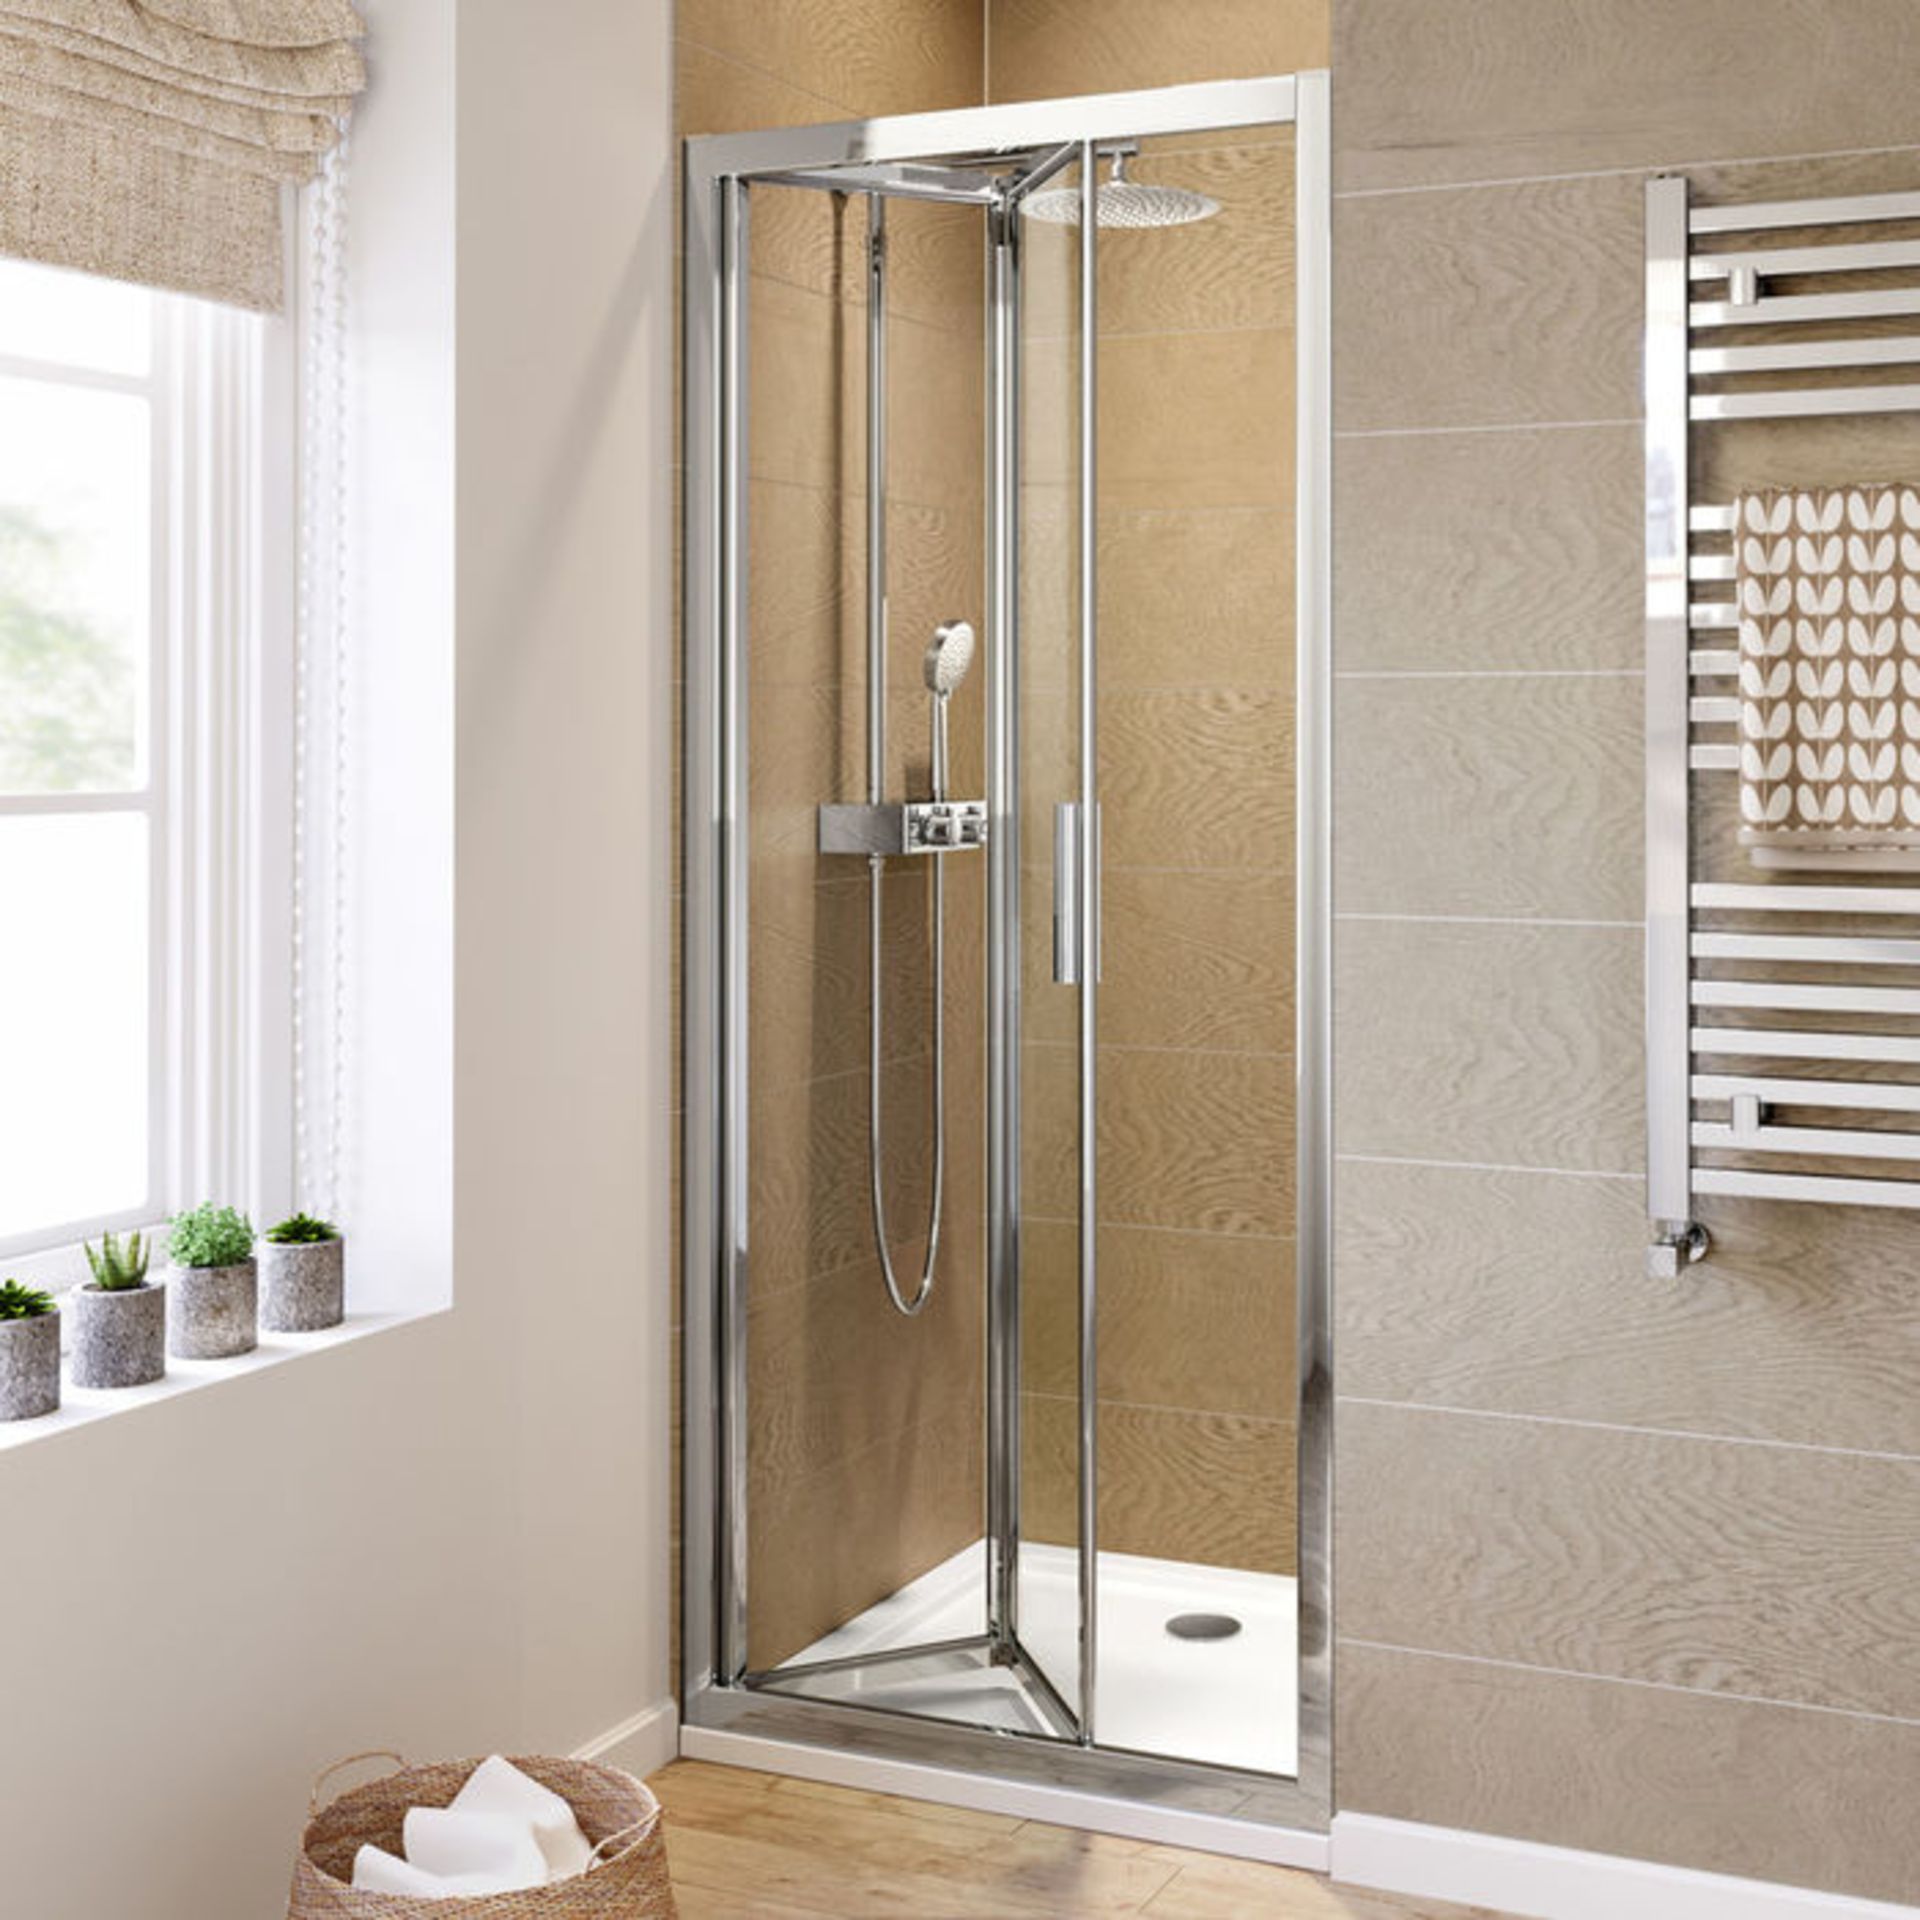 (L21) 900mm - 6mm - Elements EasyClean Bifold Shower Door. RRP £299.99. We love this because Bi-Fold - Image 3 of 3